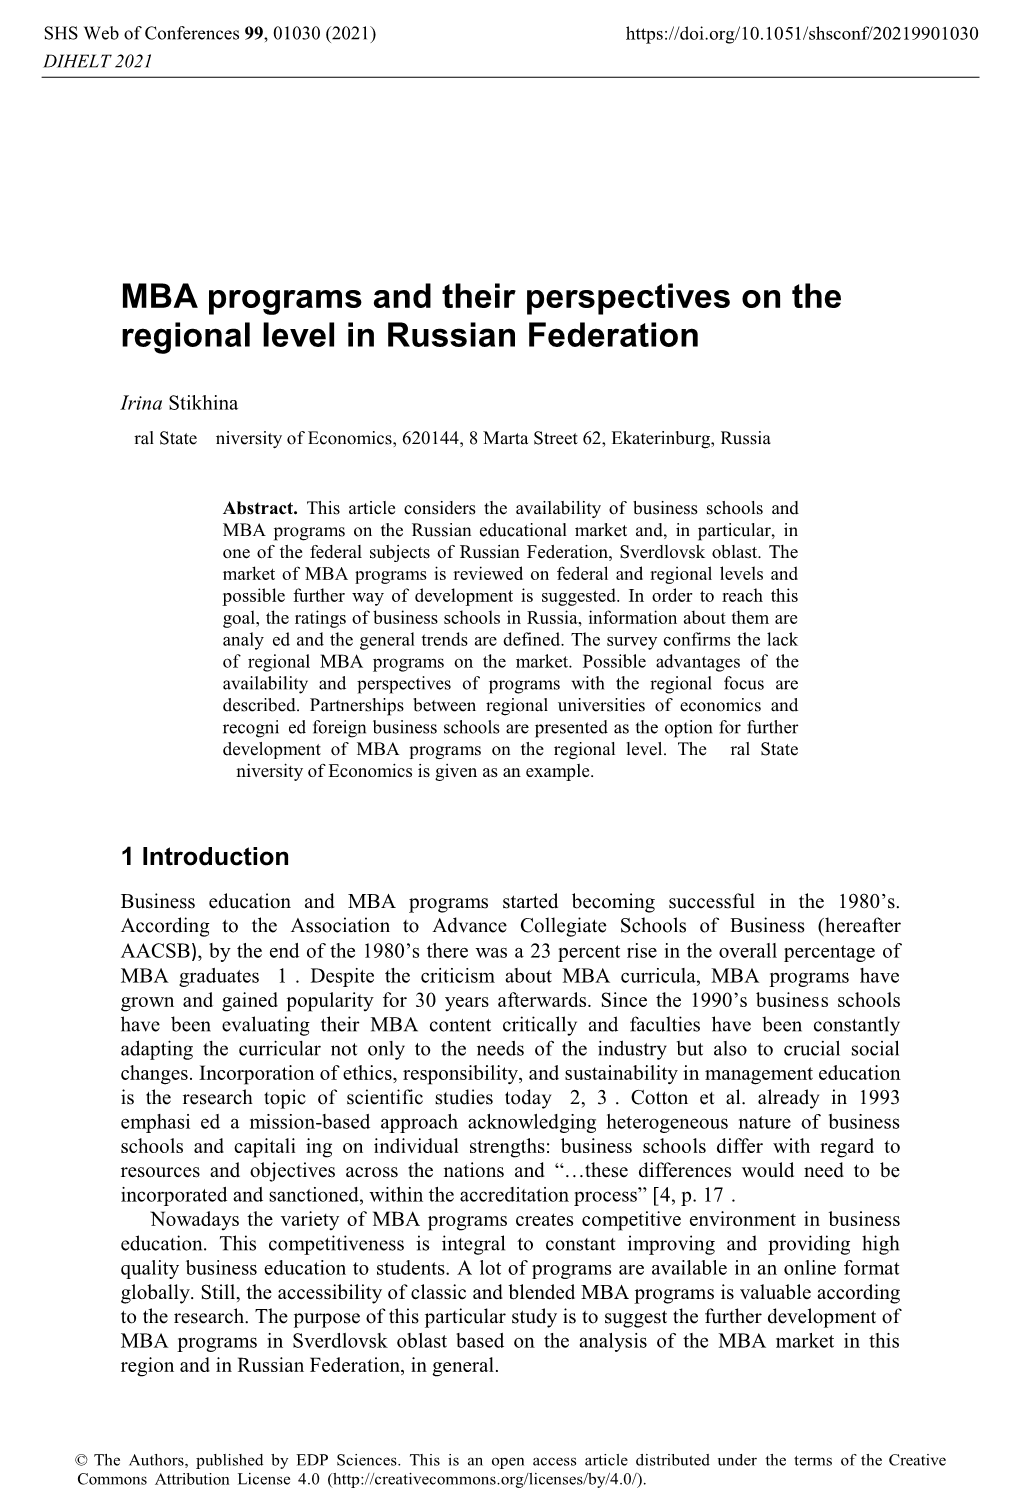 MBA Programs and Their Perspectives on the Regional Level in Russian Federation